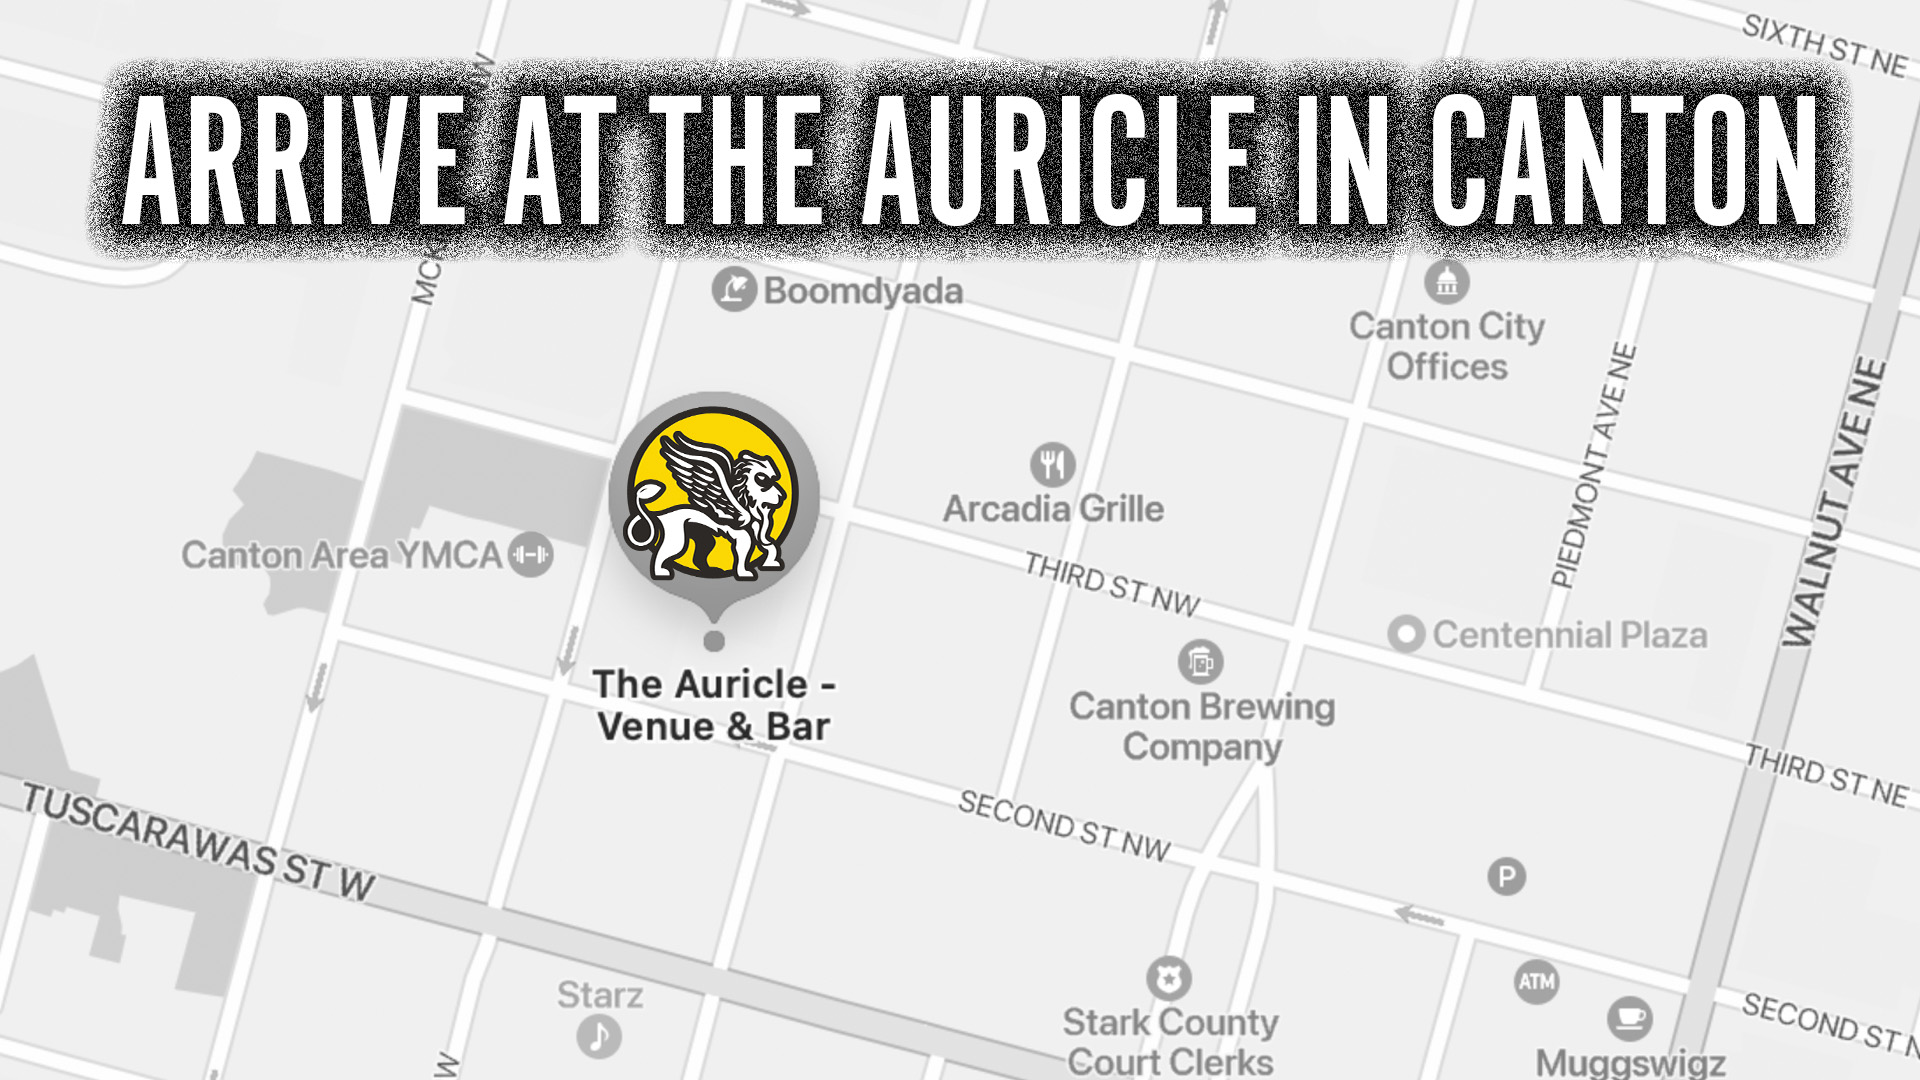 [1] Arrive at the Auricle